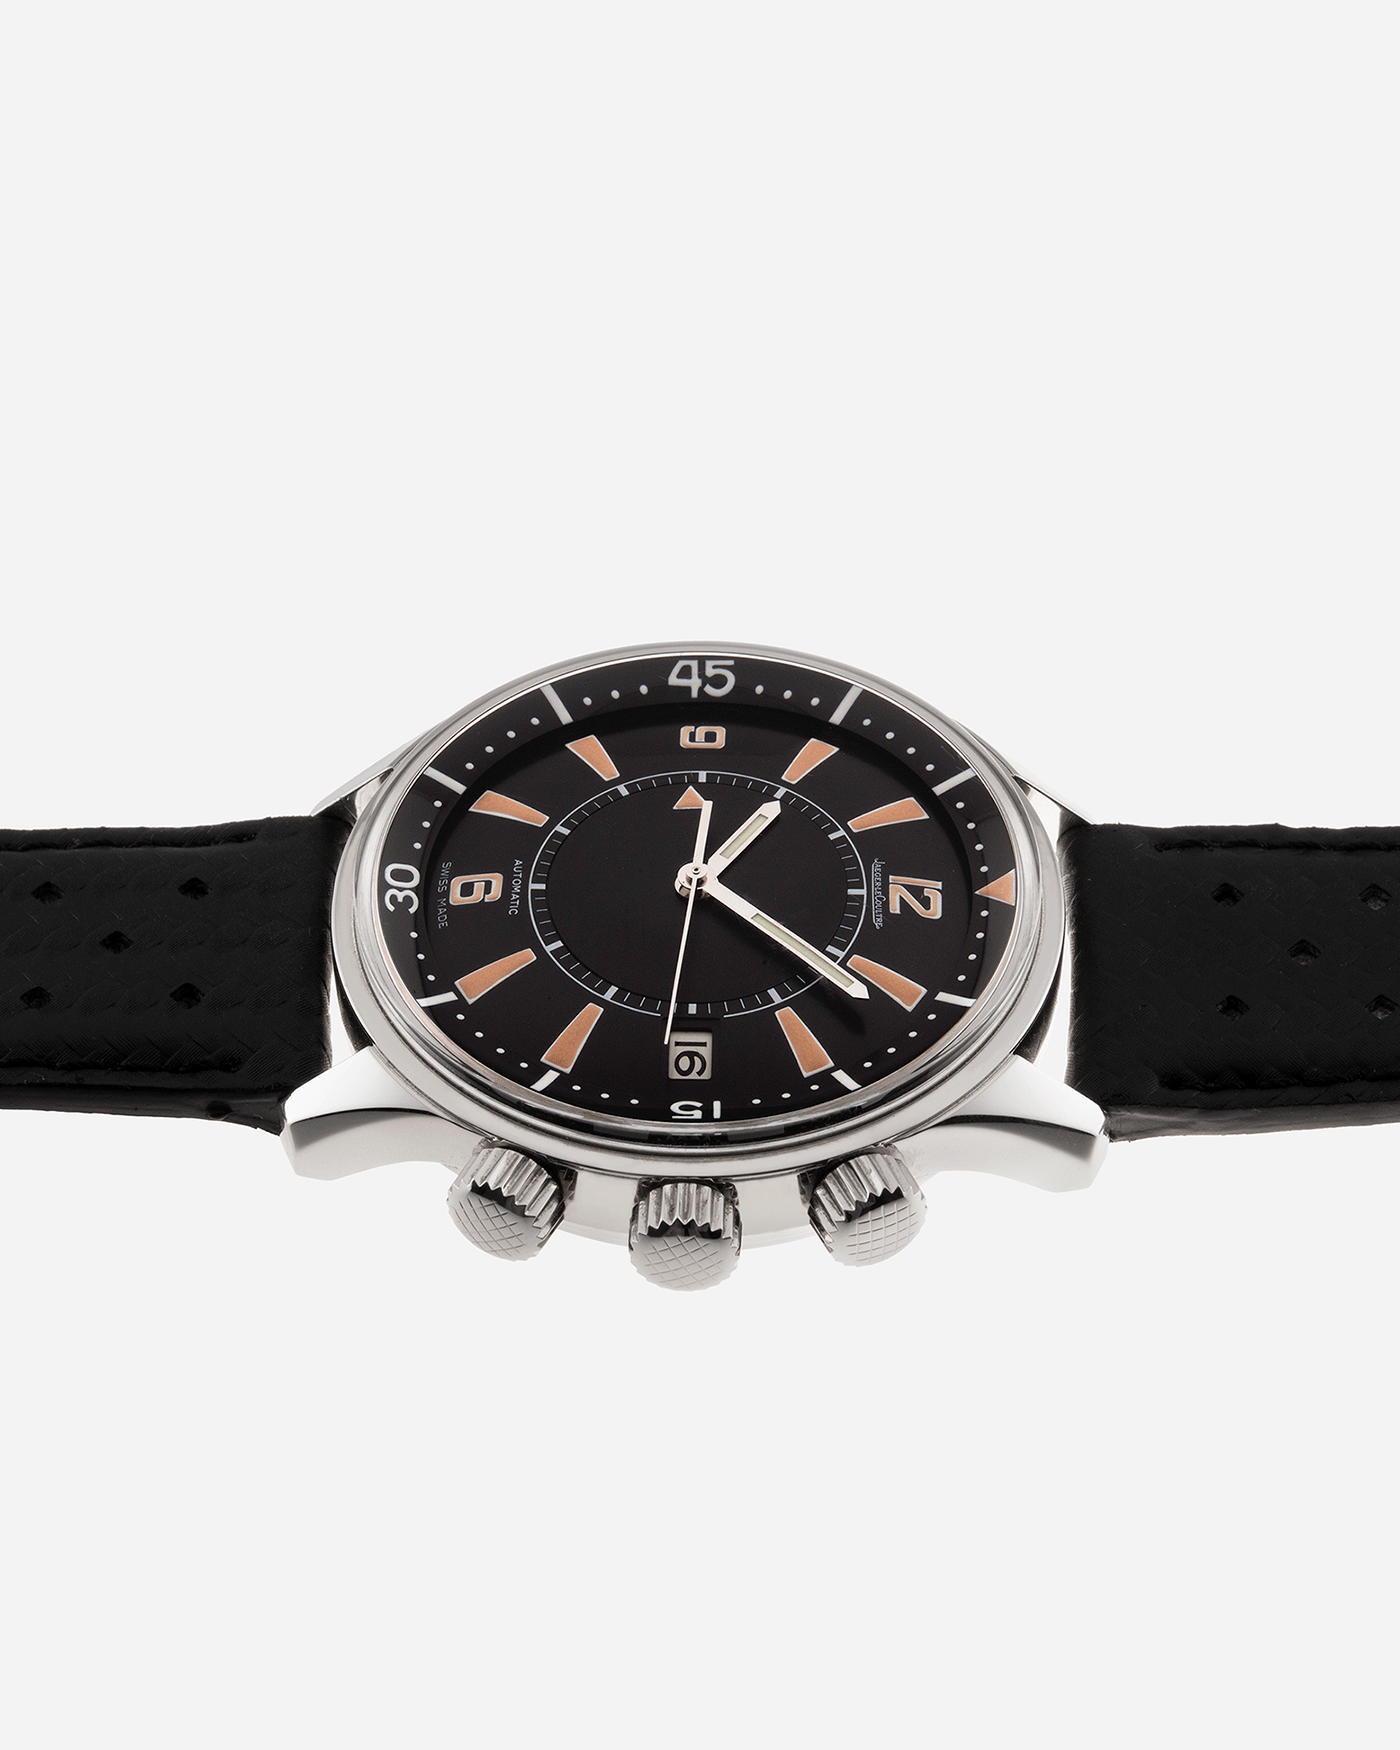 Brand: Jaeger-LeCoultre Model: Memovox Tribute to Polaris Reference Number: 190.8.96 Year: 2008 Material: Stainless Steel Movement: Jaeger-LeCoultre Calibre 956 Case Diameter: 42.5mm Strap: Jaeger-LeCoultre Black Perforated Diving Strap